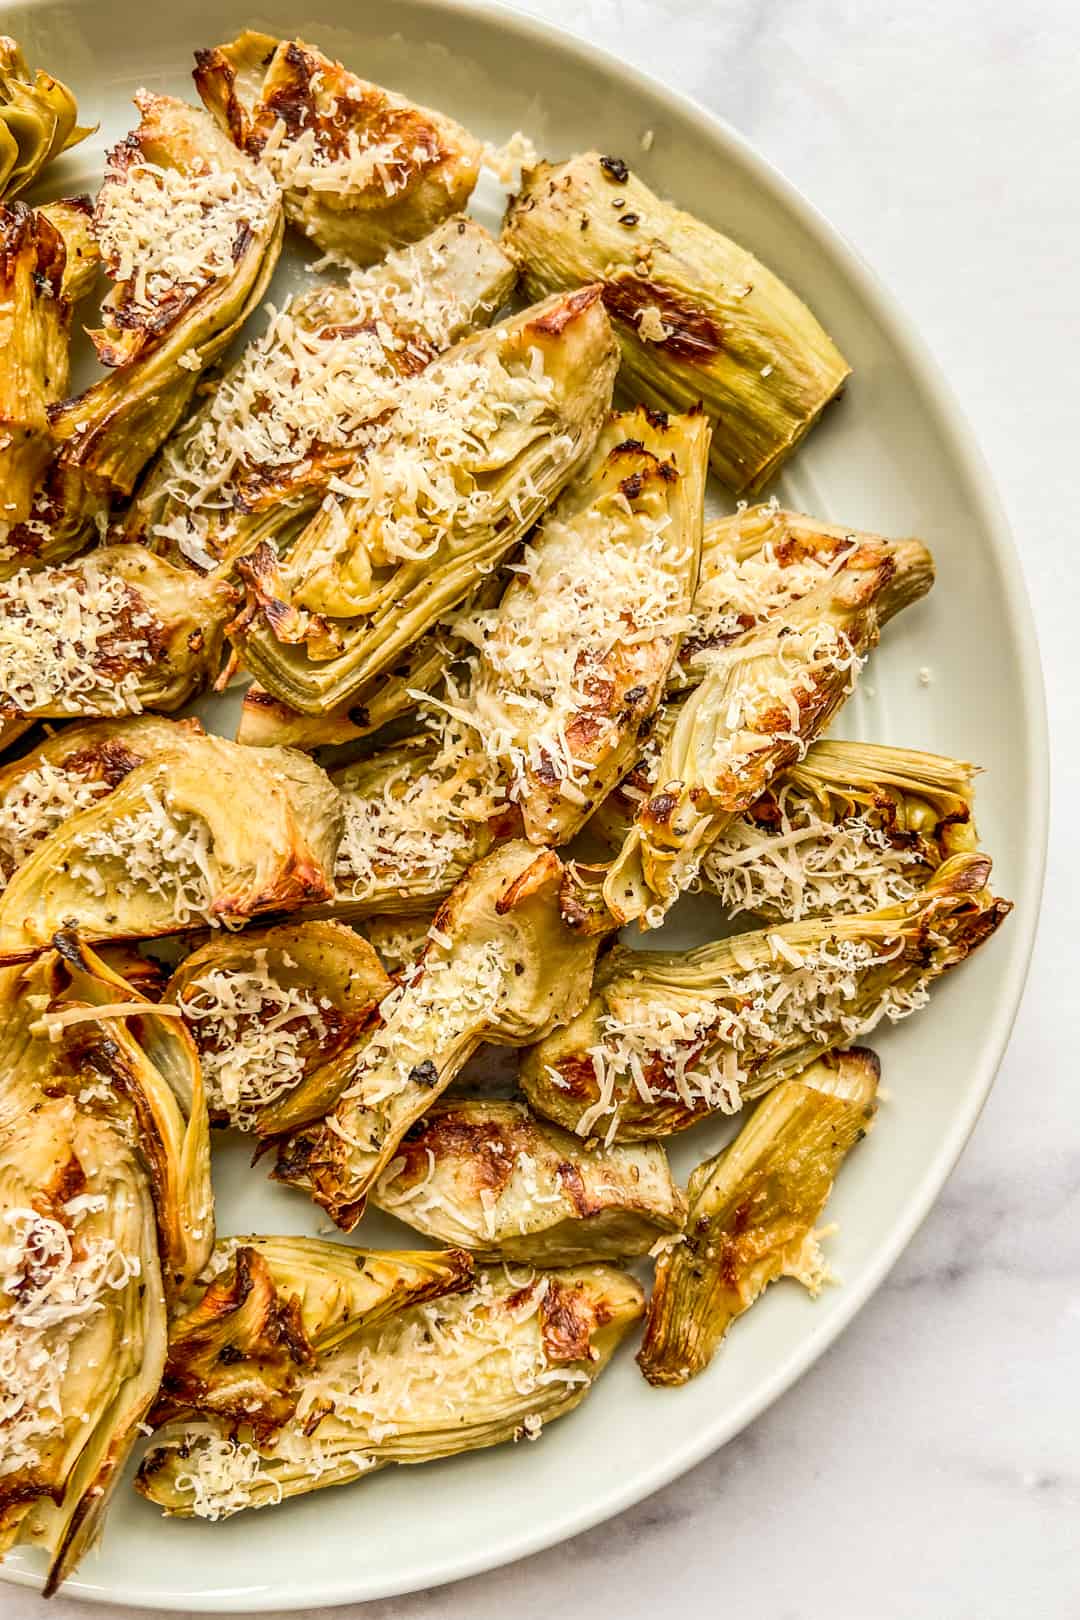 Roasted artichoke hearts topped with parmesan on a small green plate.